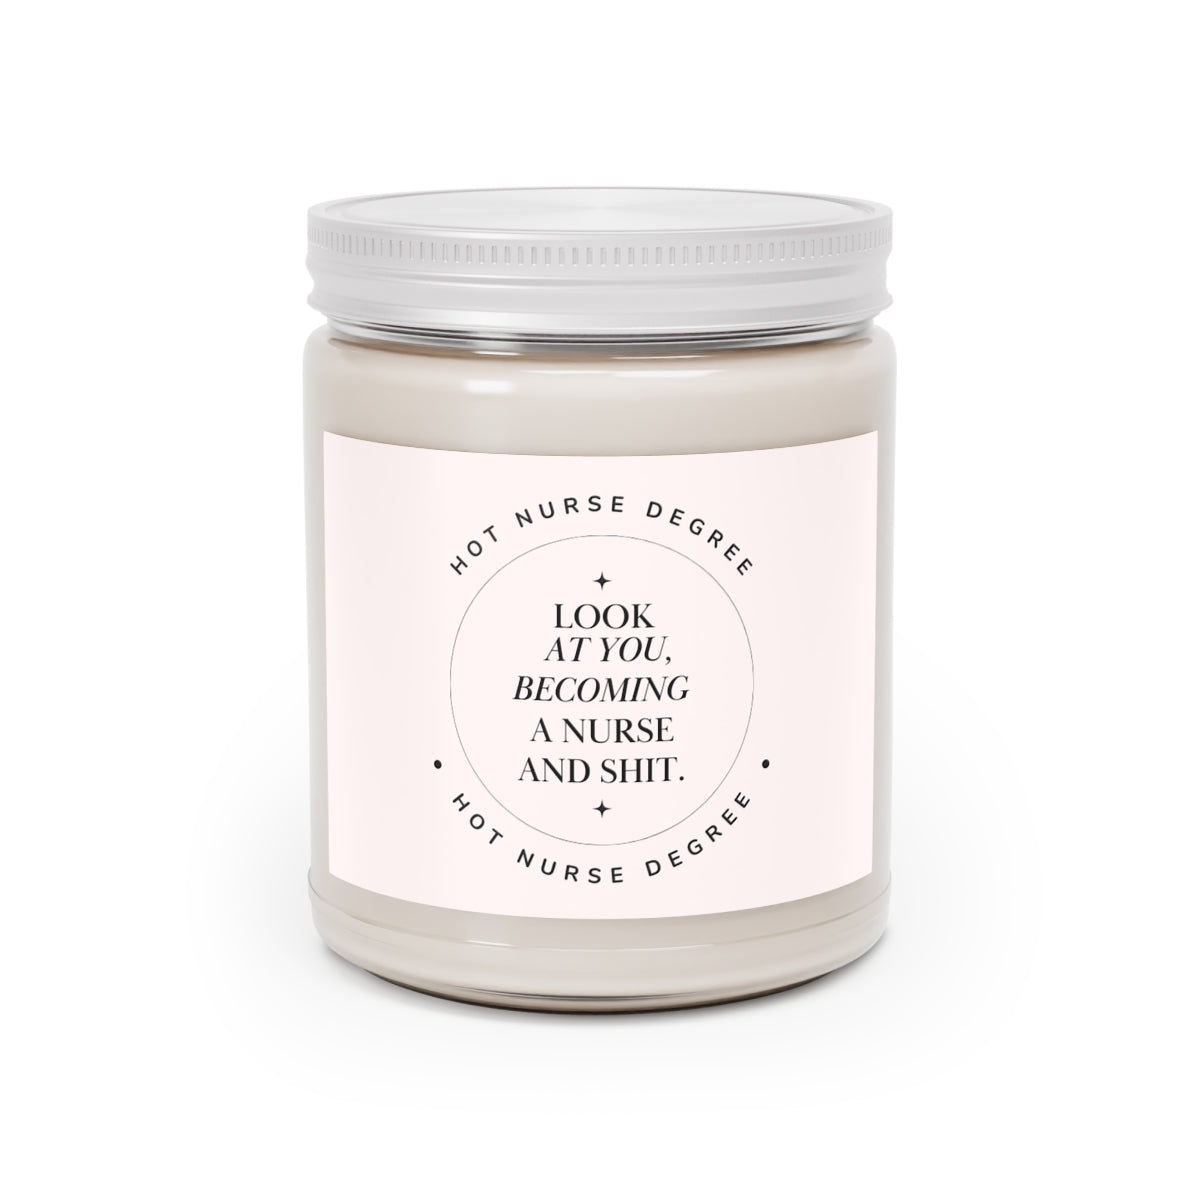 Look At You, Becoming a Nurse and Shit Scented Candles, 9oz Home Decor Printify Comfort Spice One size 